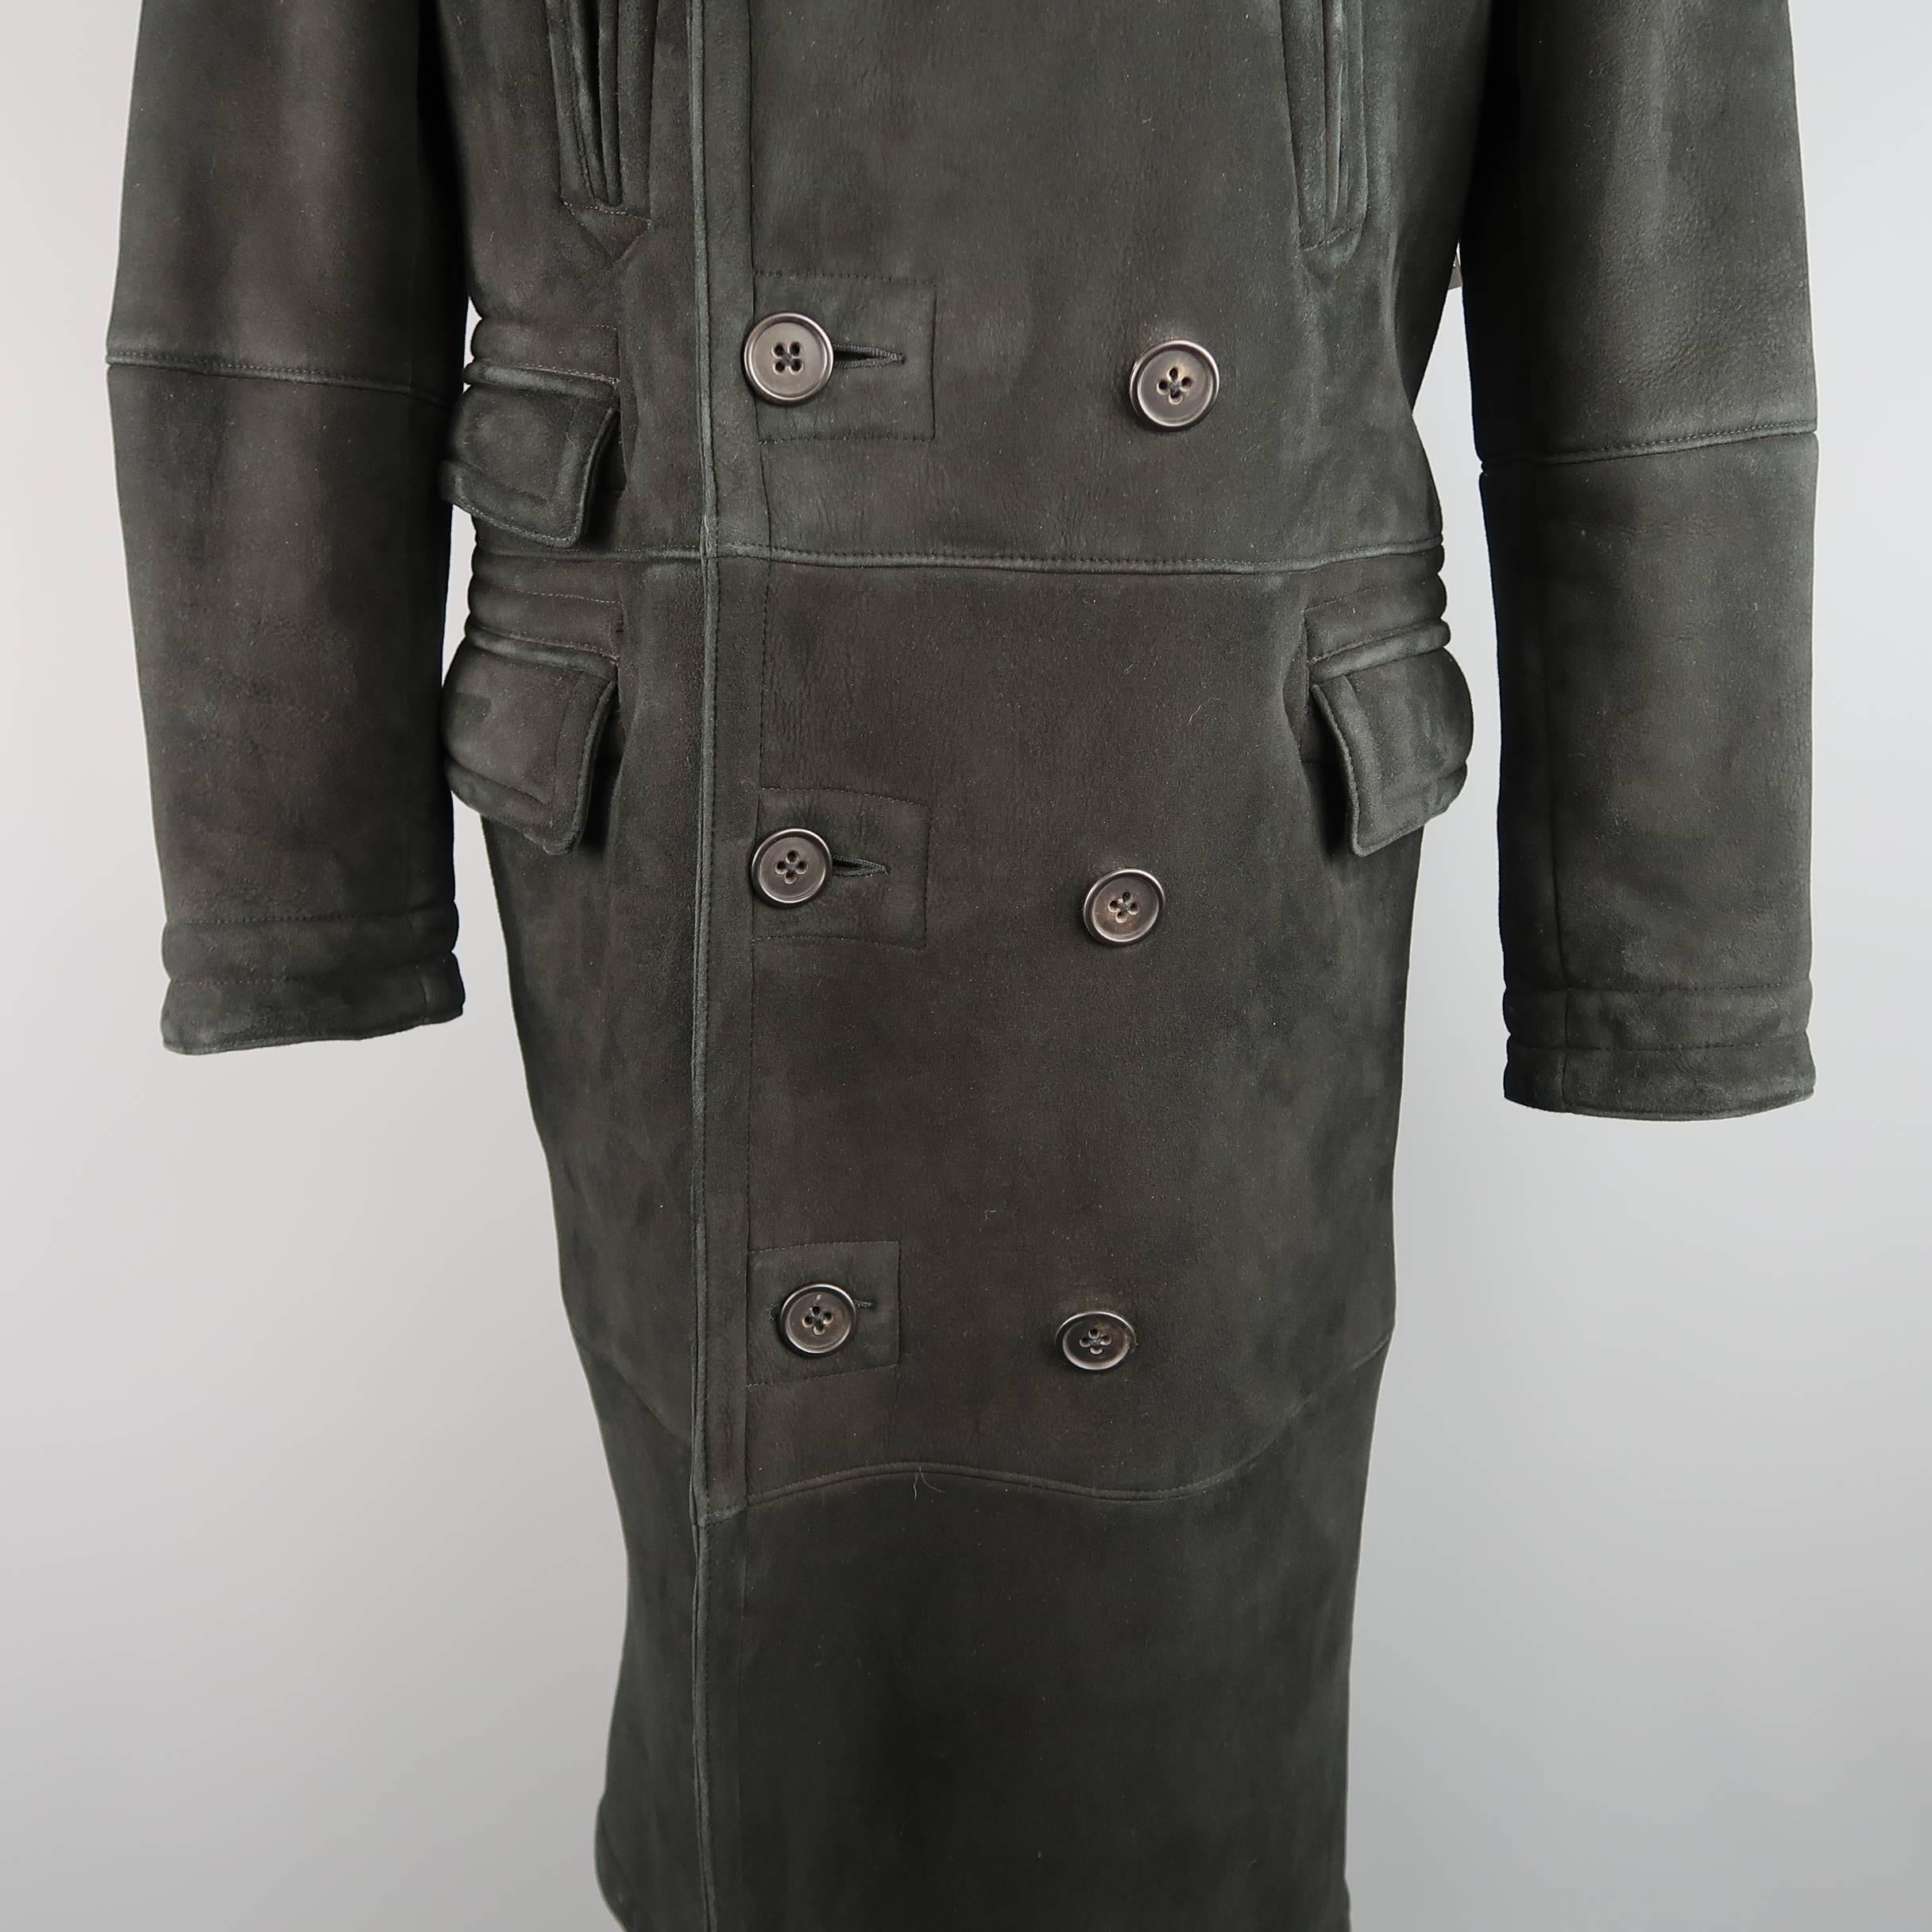 This full length POLO RALPH LAUREN pea coat comes in black Italian shearling and features a pointed fur lapel, double breasted button up front, slanted slit pockets, triple flap pockets, and full shearling fur interior. Wear throughout. As-Is.
